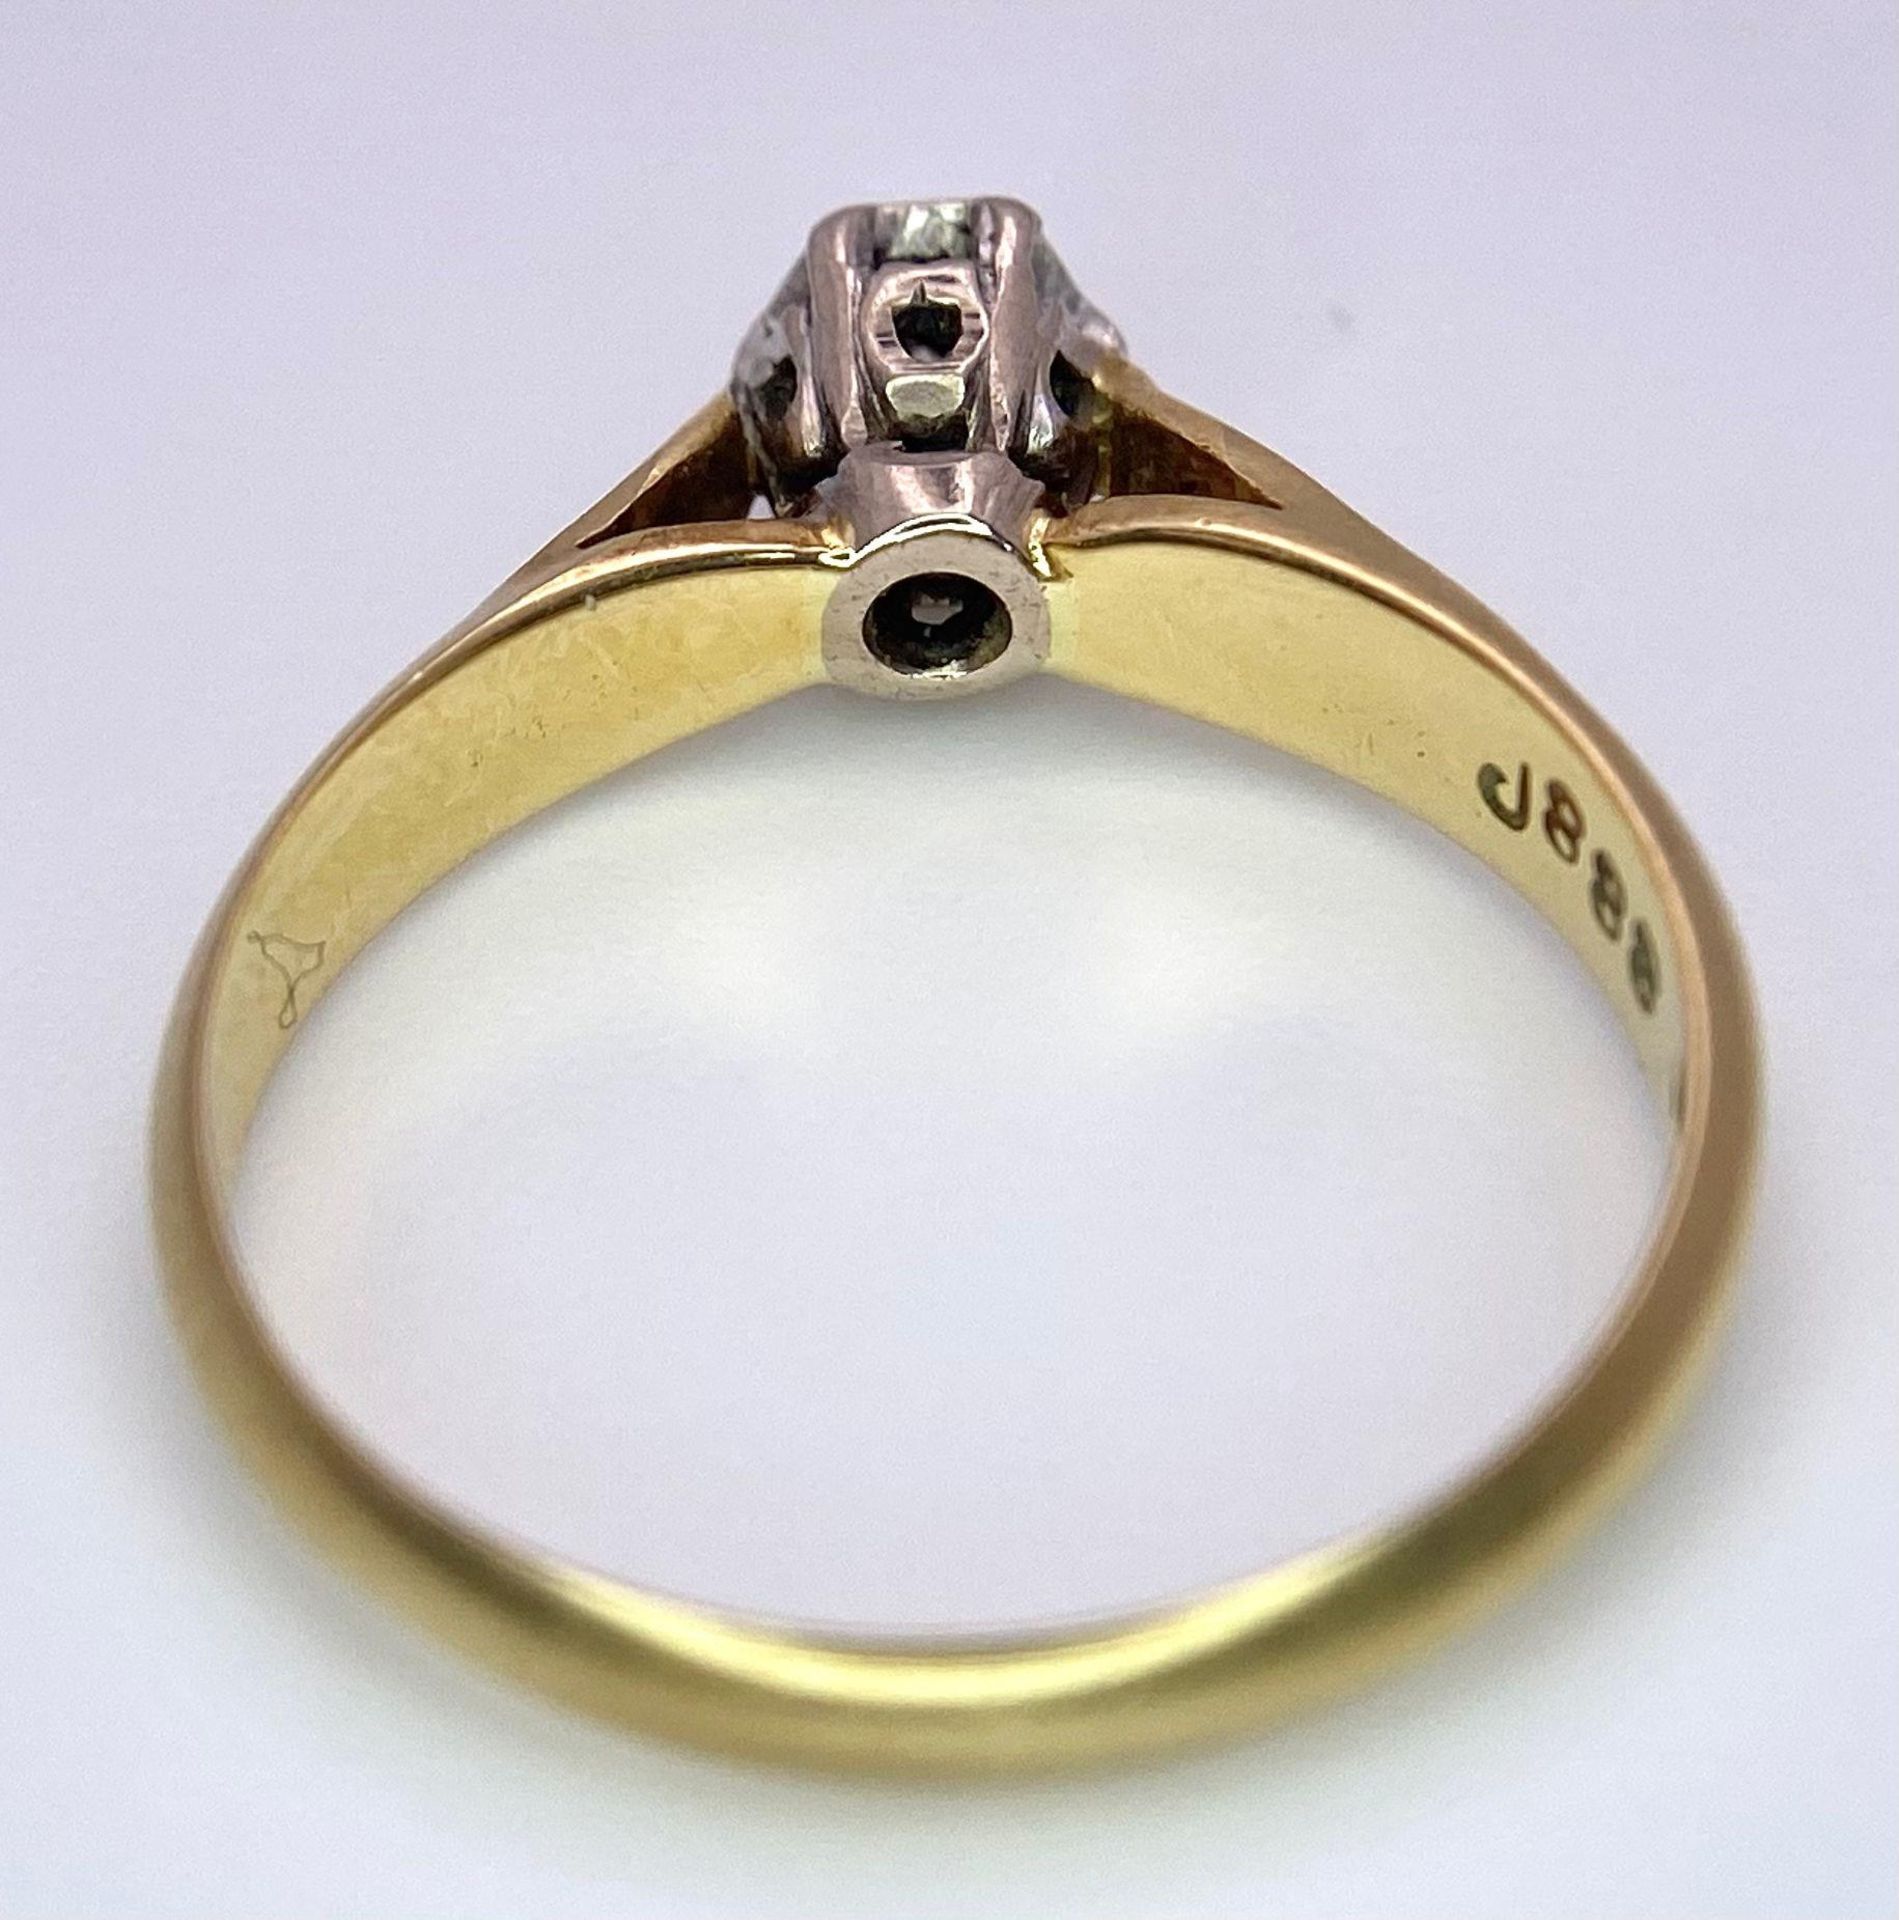 A Vintage 18K Yellow Gold Diamond Solitaire Ring. Size L. 2.41g total weight. Full UK hallmarks. - Image 5 of 5